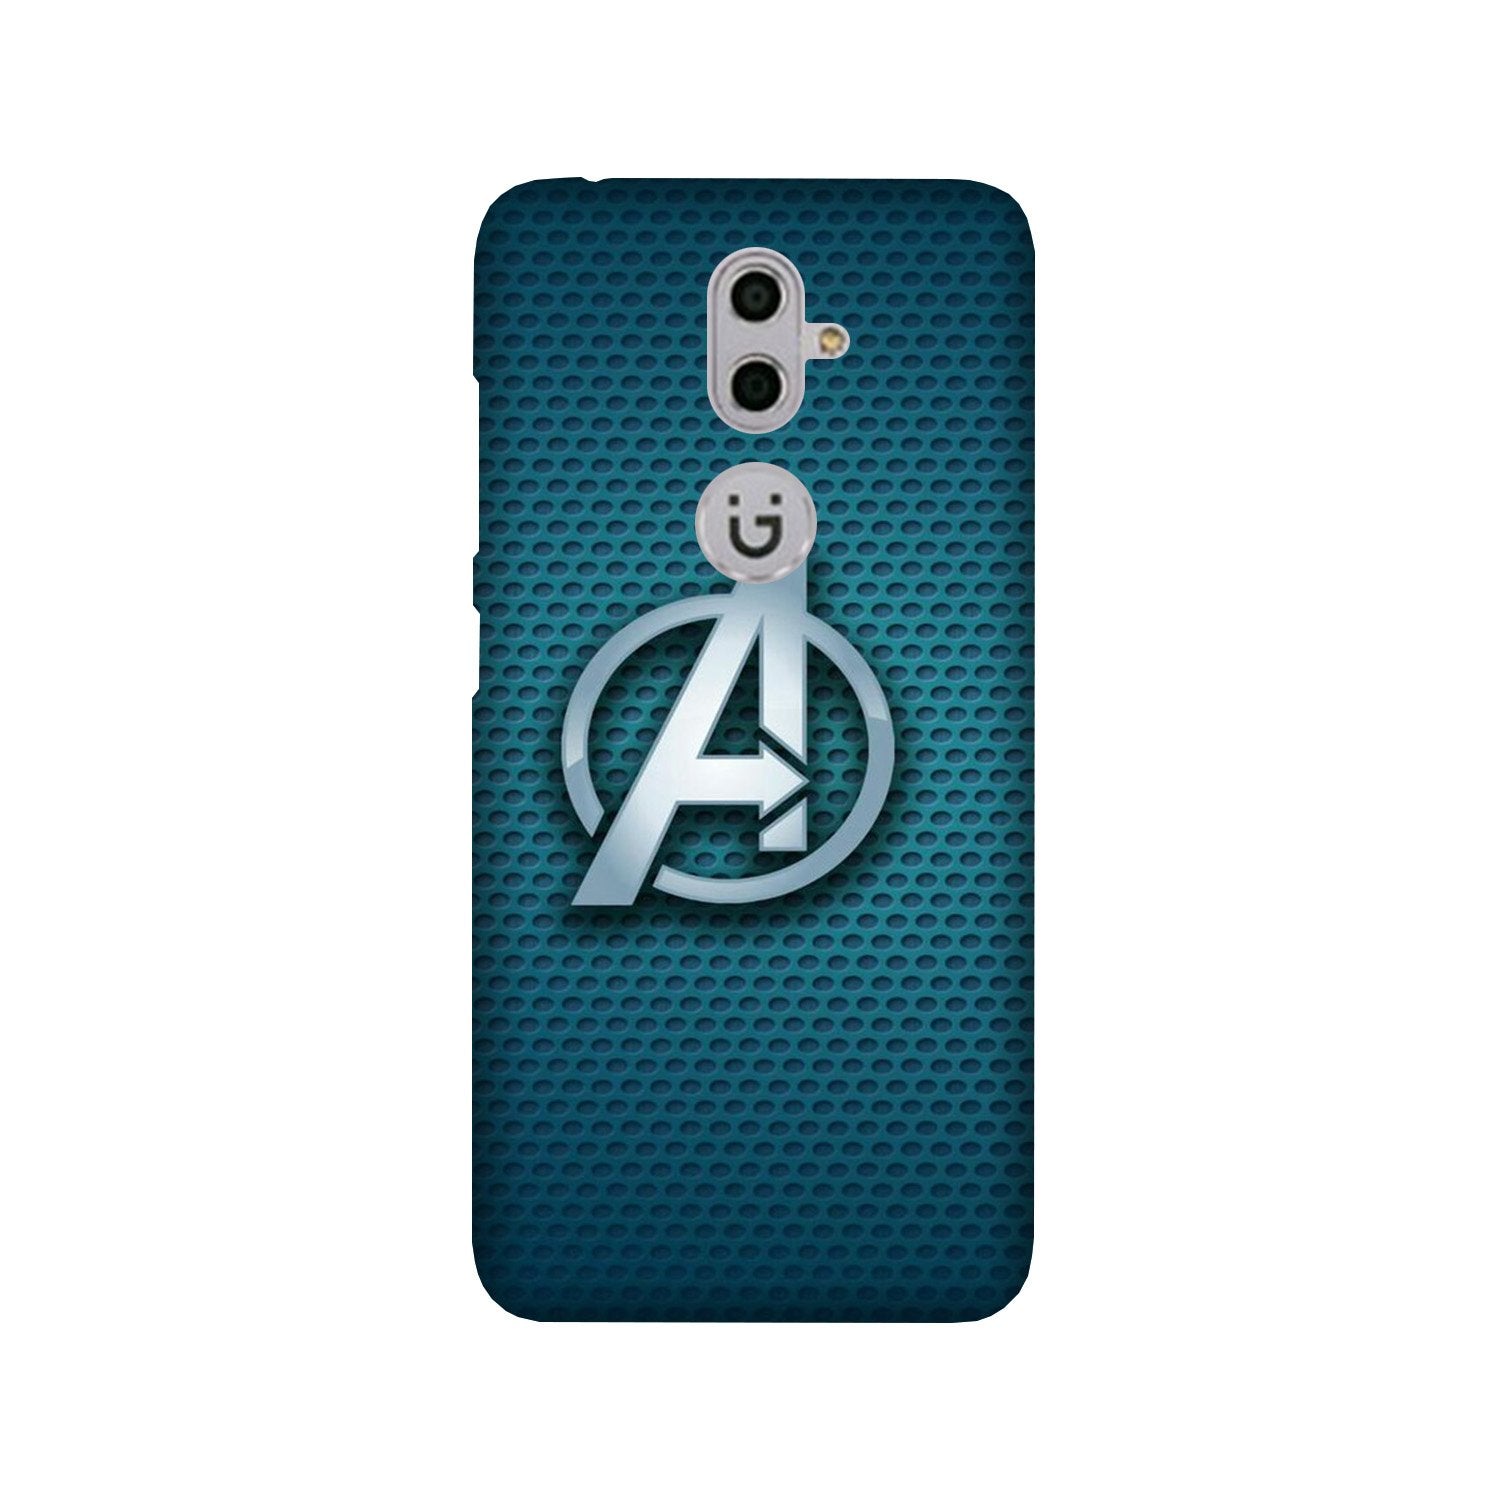 Avengers Case for Gionee S9 (Design No. 246)